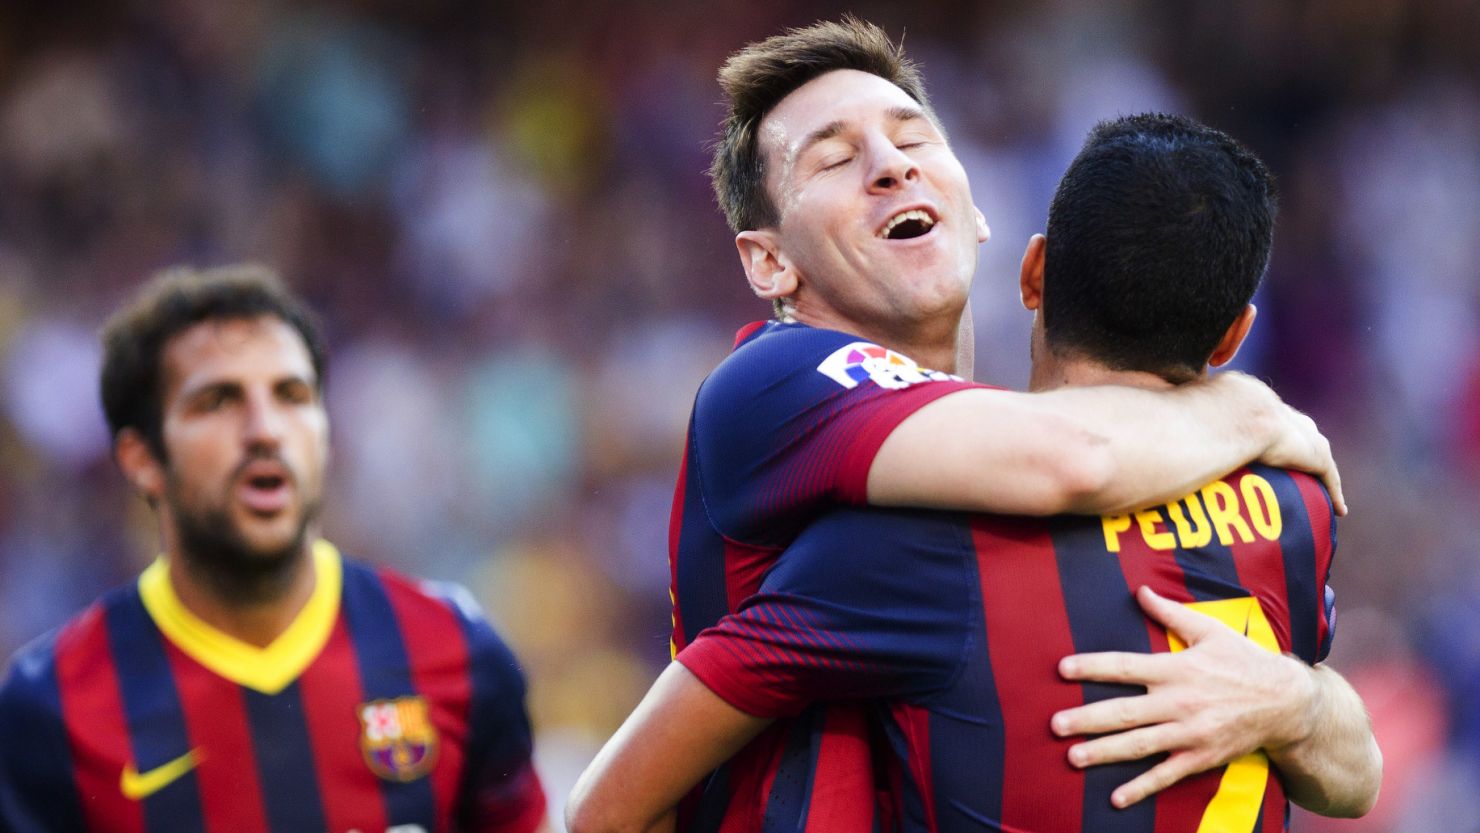 Pedro and Lionel Messi were both on target twice in the 7-0 rout of Levante in the Nou Camp.